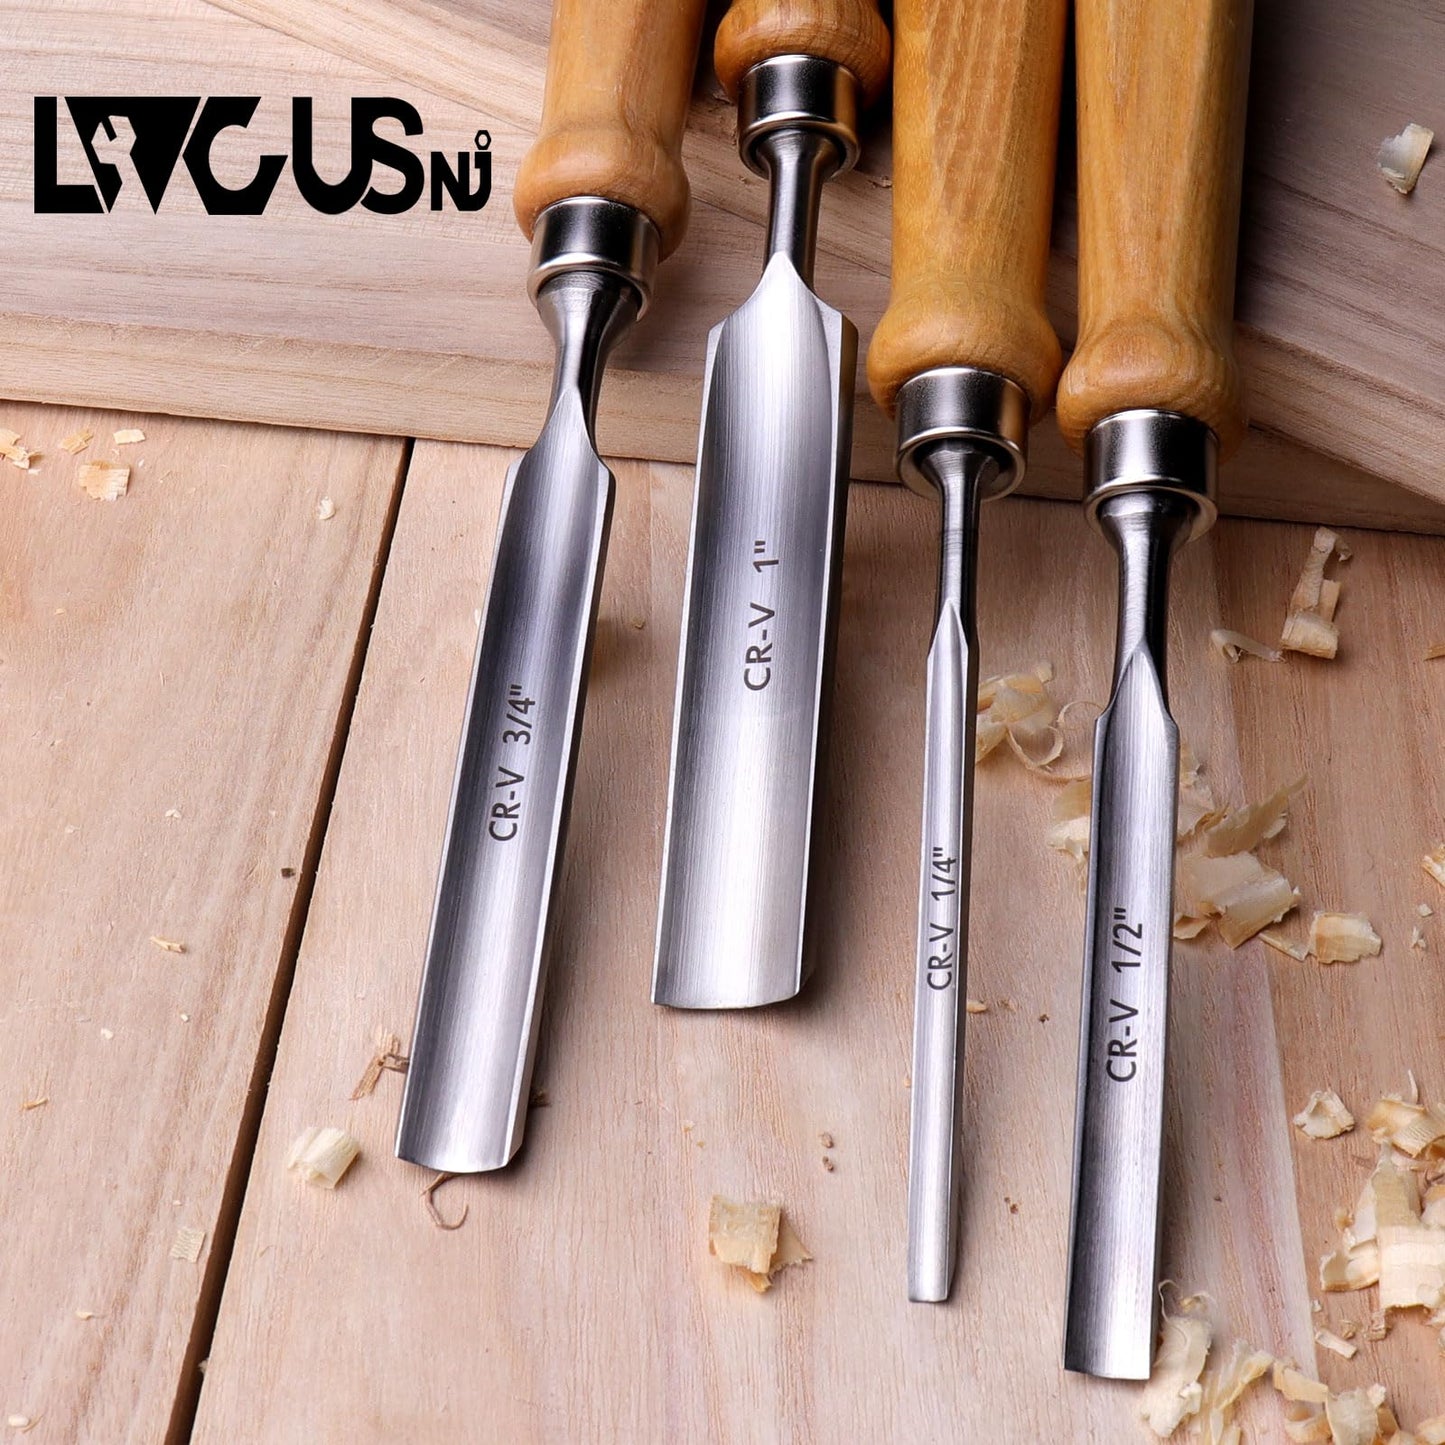 LWCUSNJ 4-Pieces Woodworking Wood Chisel Set,CR-V Steel Sharp Curved Edge Gouge Firm Wood Handle Carpentry Gouge Tools